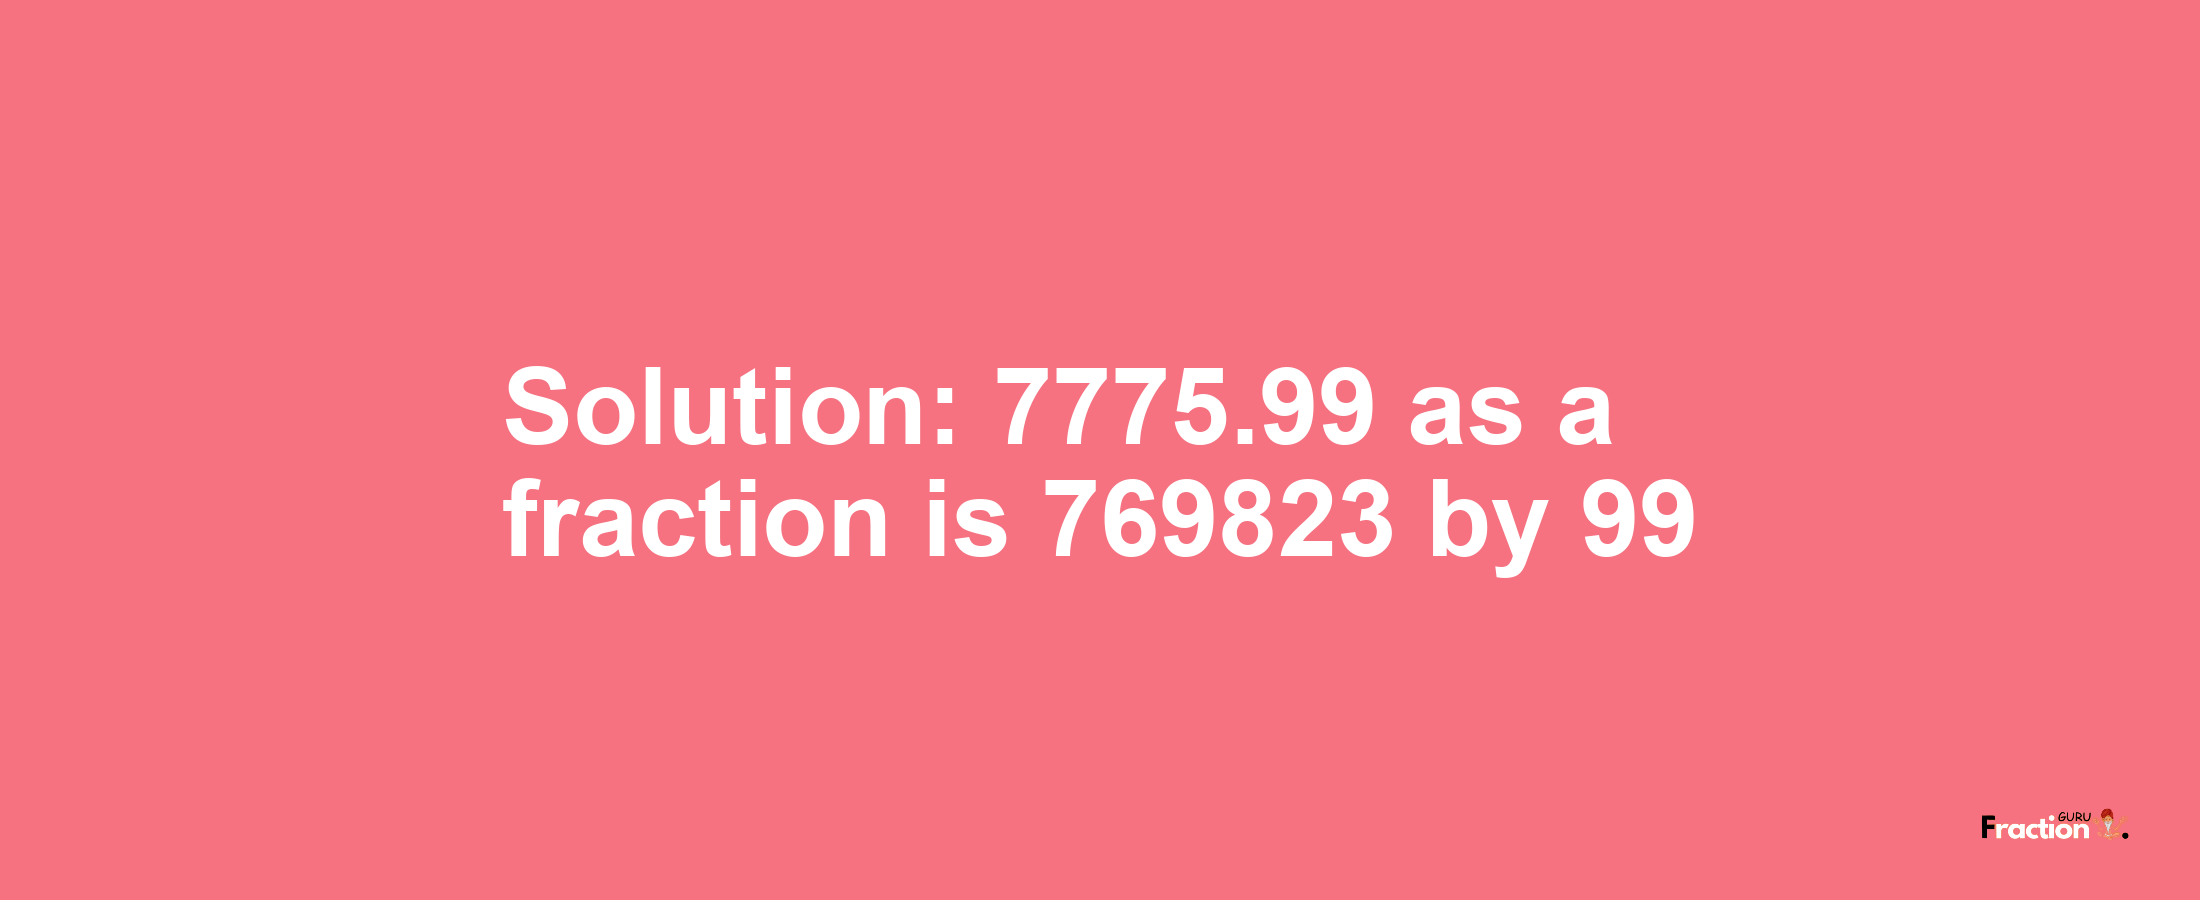 Solution:7775.99 as a fraction is 769823/99